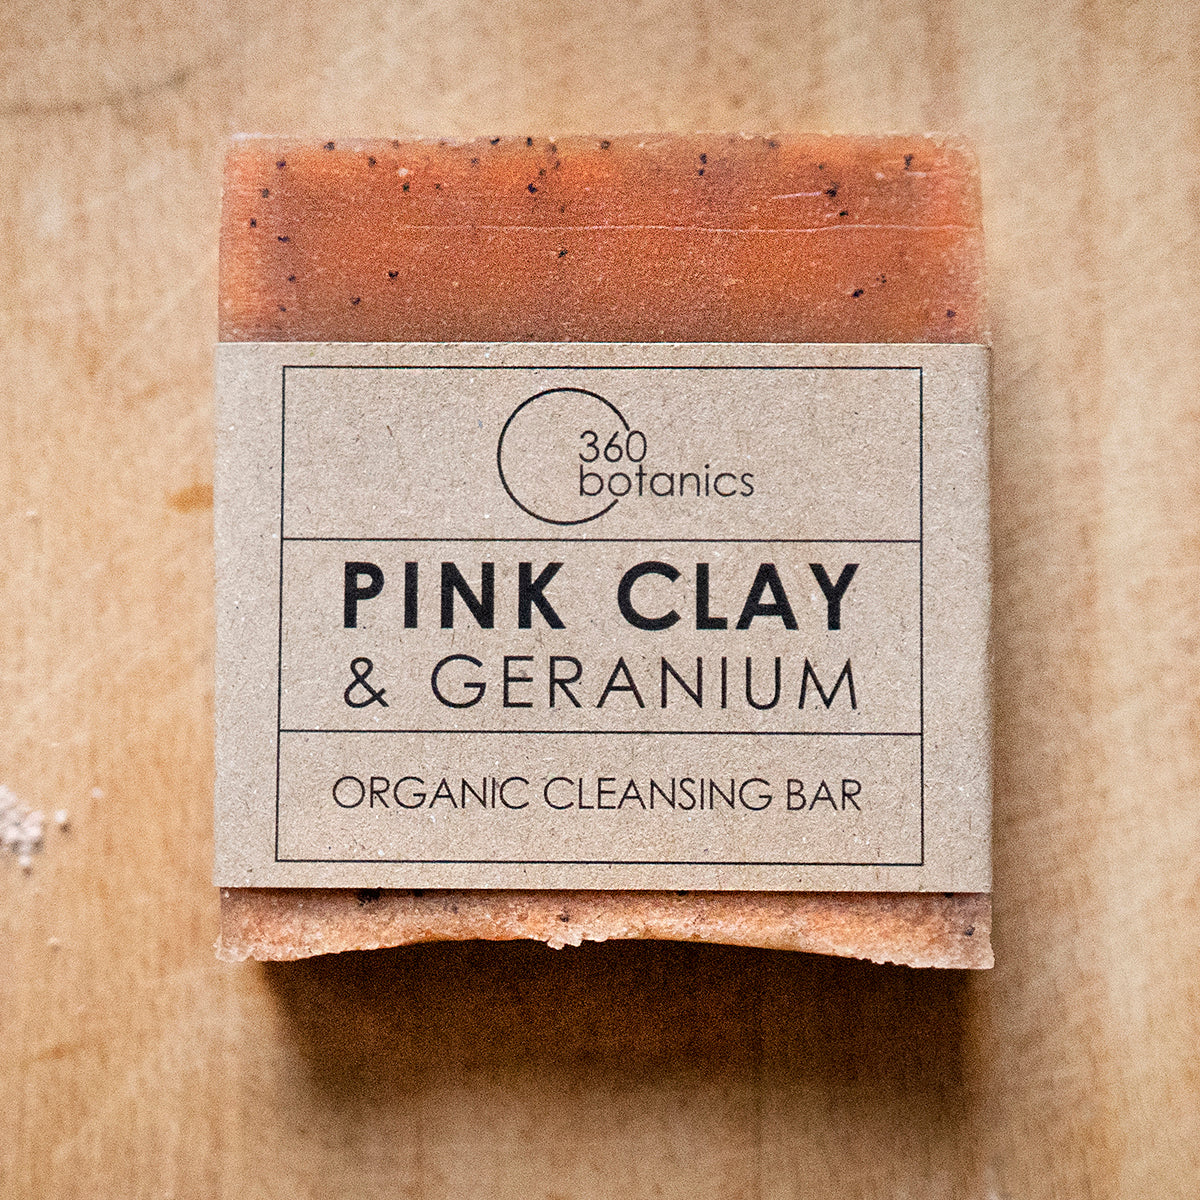 360 Botanics Pink Clay & Geranium Organic Cleansing Bar with visible poppy seeds, natural and handmade, displayed on a wooden surface.